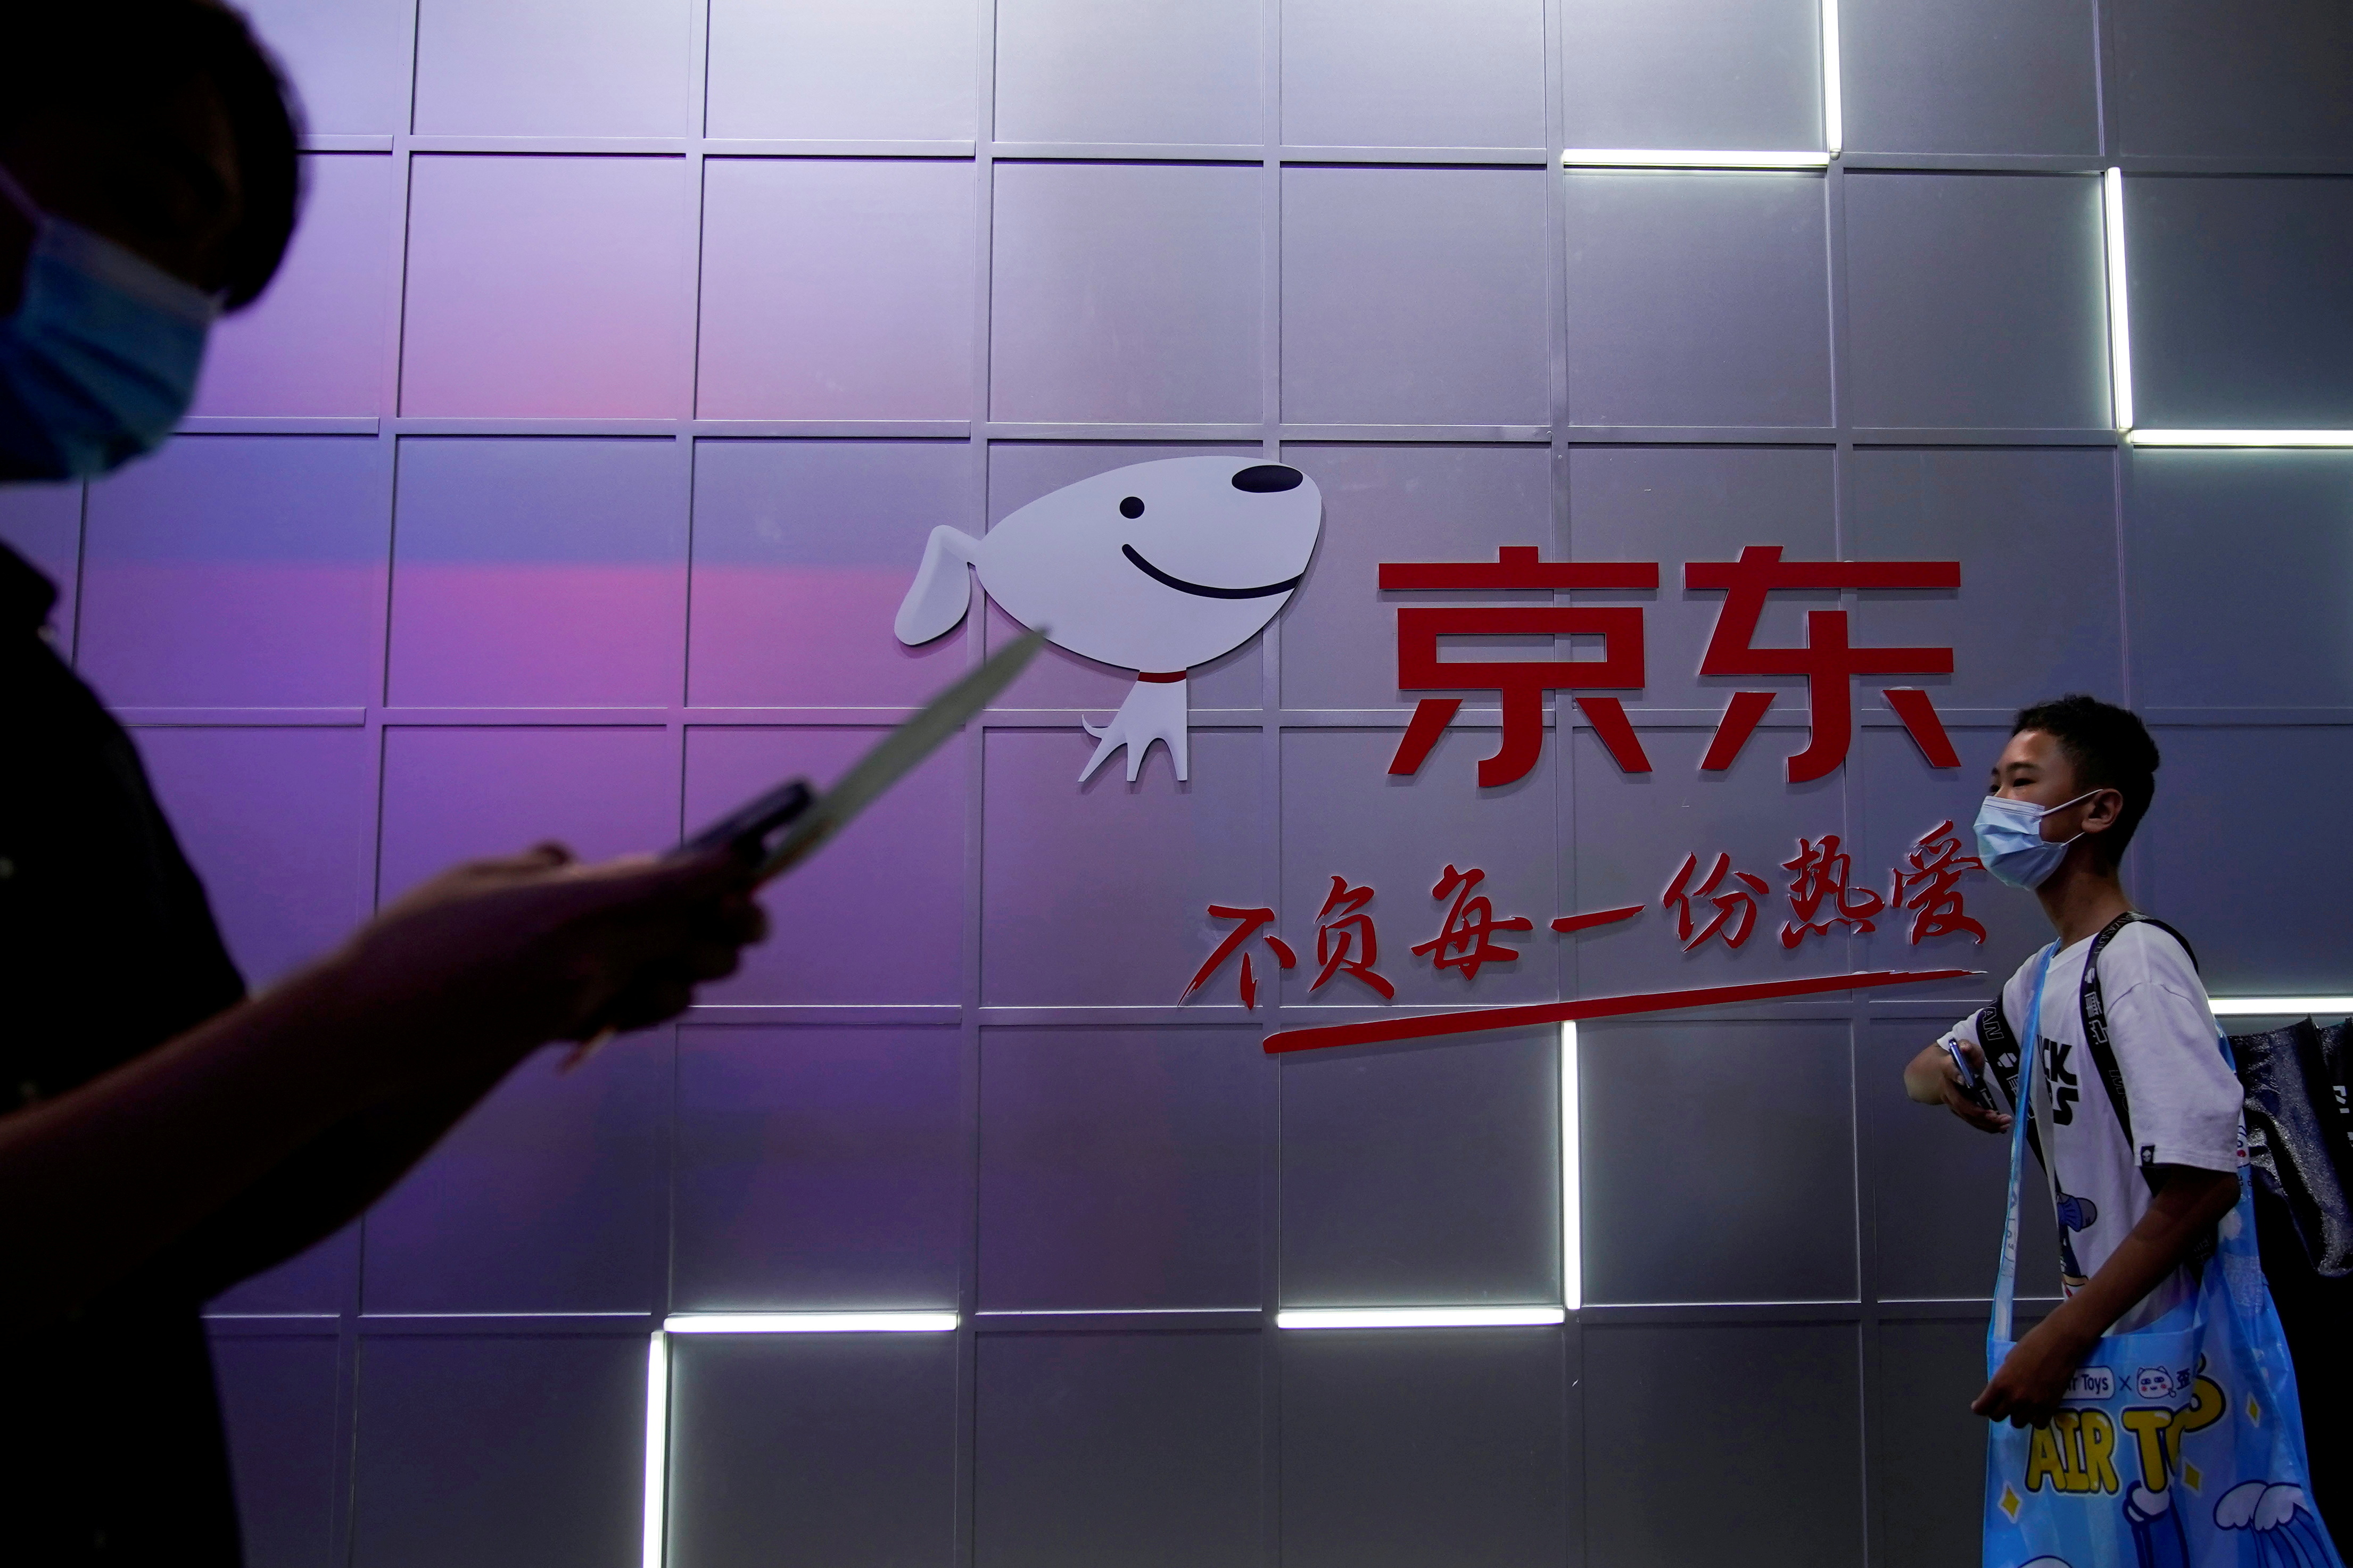 A sign of JD.com is seen at the China Digital Entertainment Expo and Conference, also known as ChinaJoy, in Shanghai